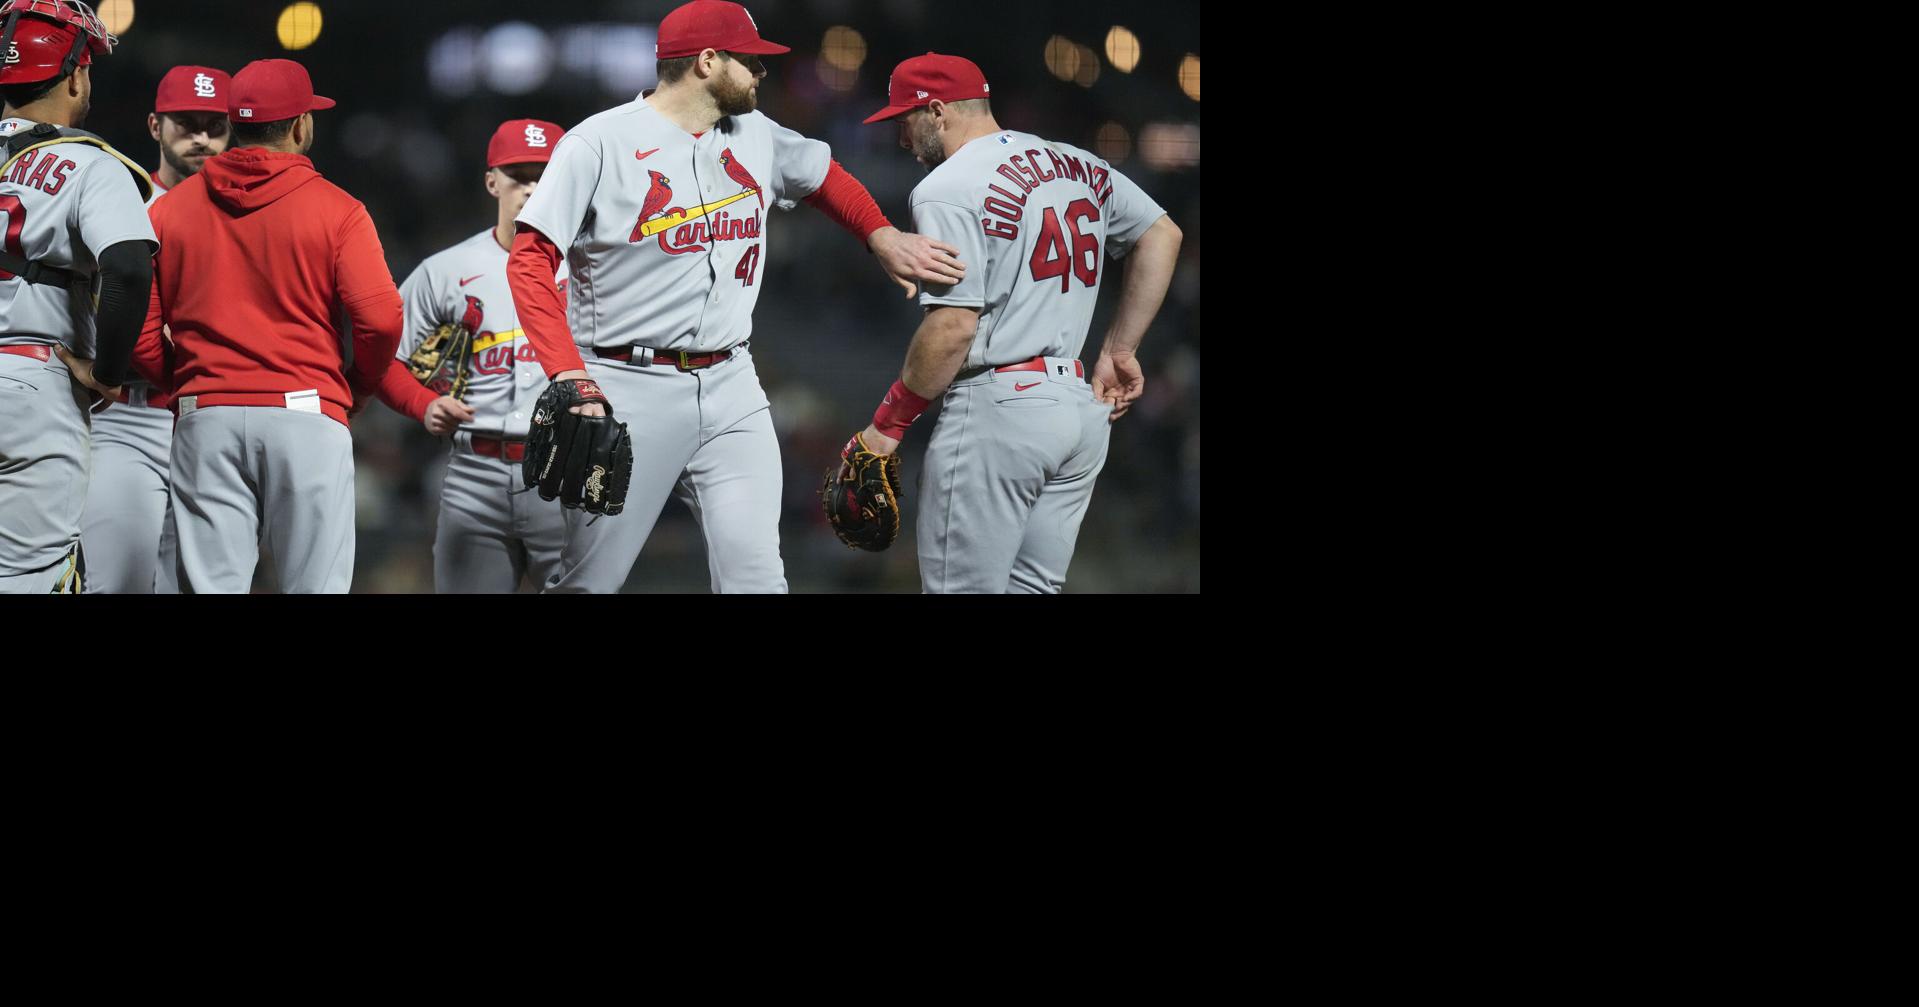 St. Louis Cardinals Hope to Save Season as Underdogs - The New York Times